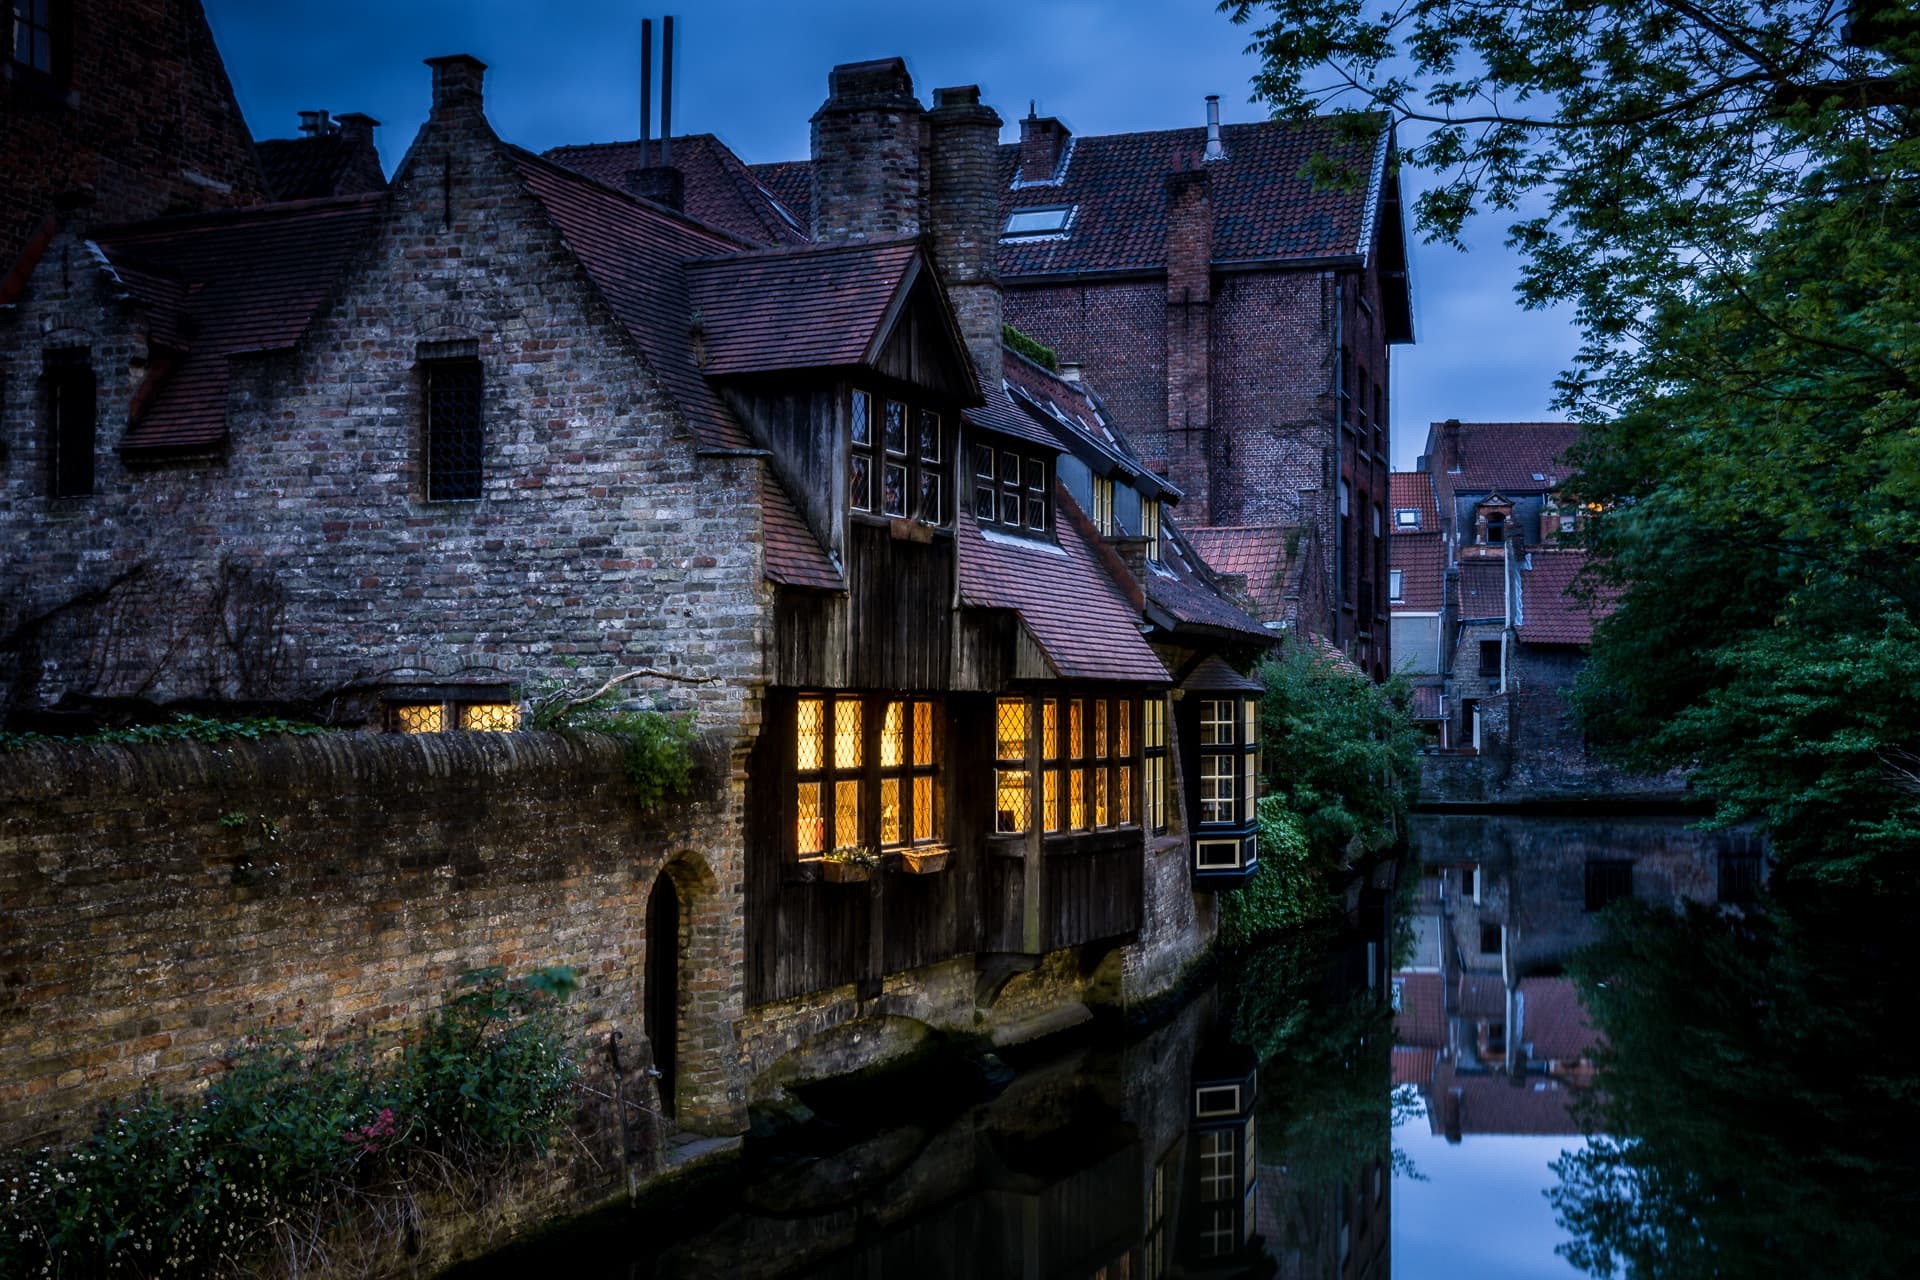 belgium, man made, ghent, canal, house, reflection, town, towns